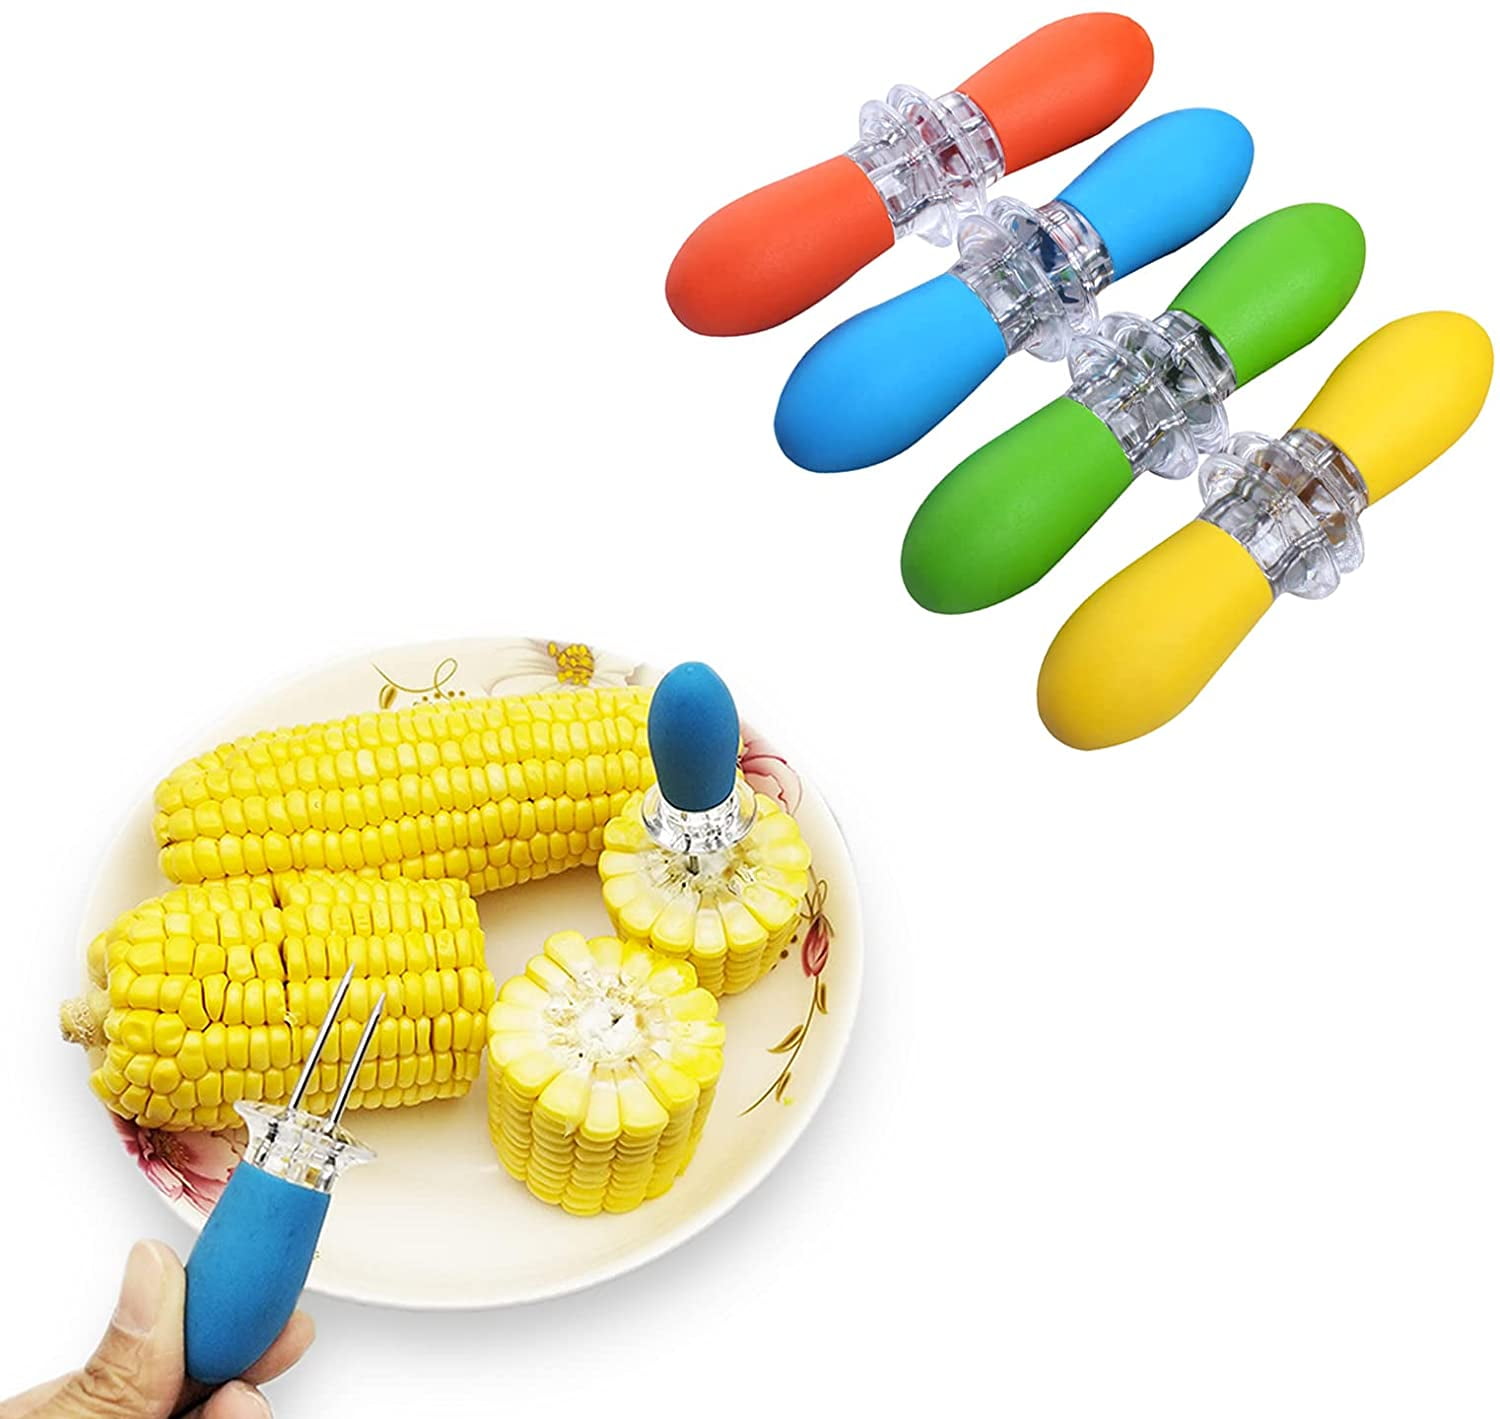 10pcs Safe Corn on the Cob Holders Skewers Needle Prongs For BBQ Whole 